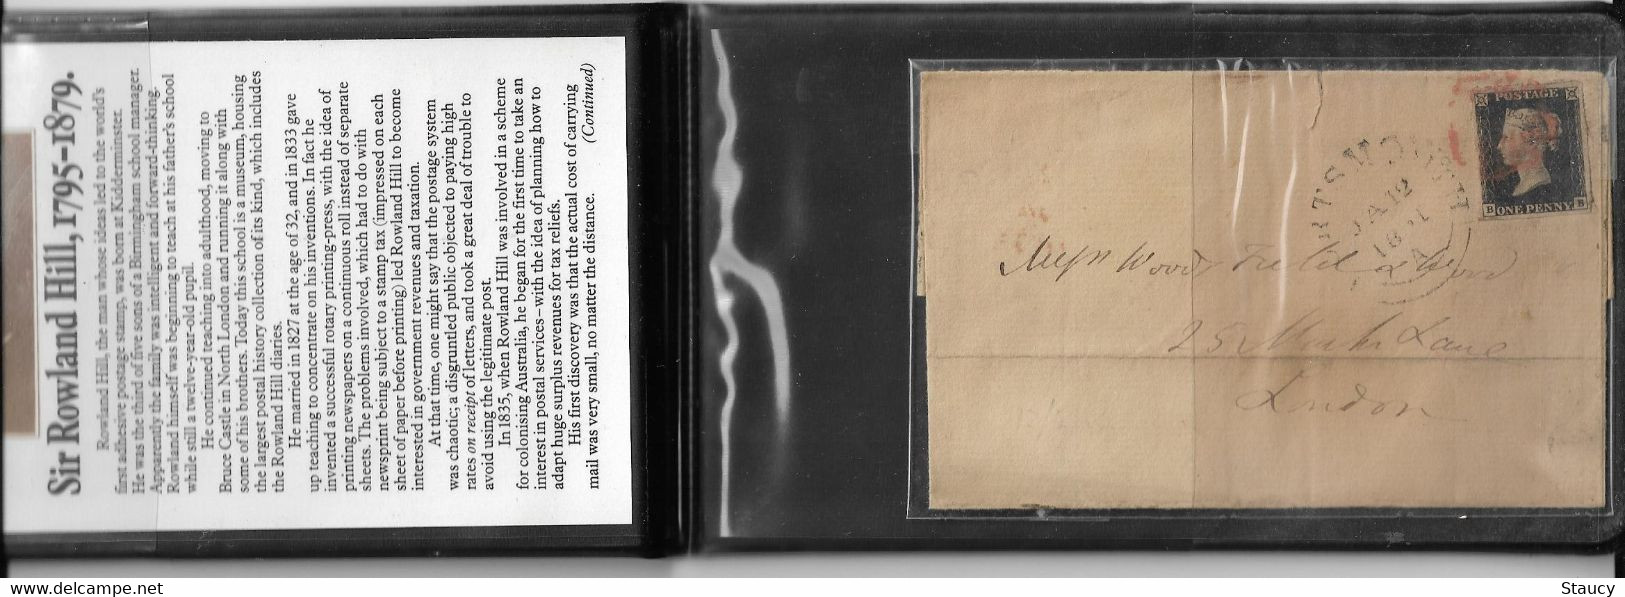 UK GB GREAT BRITAIN 1841 SG2 Penny Black four Margins example on cover Portsmouth to London (BB) used as per scan